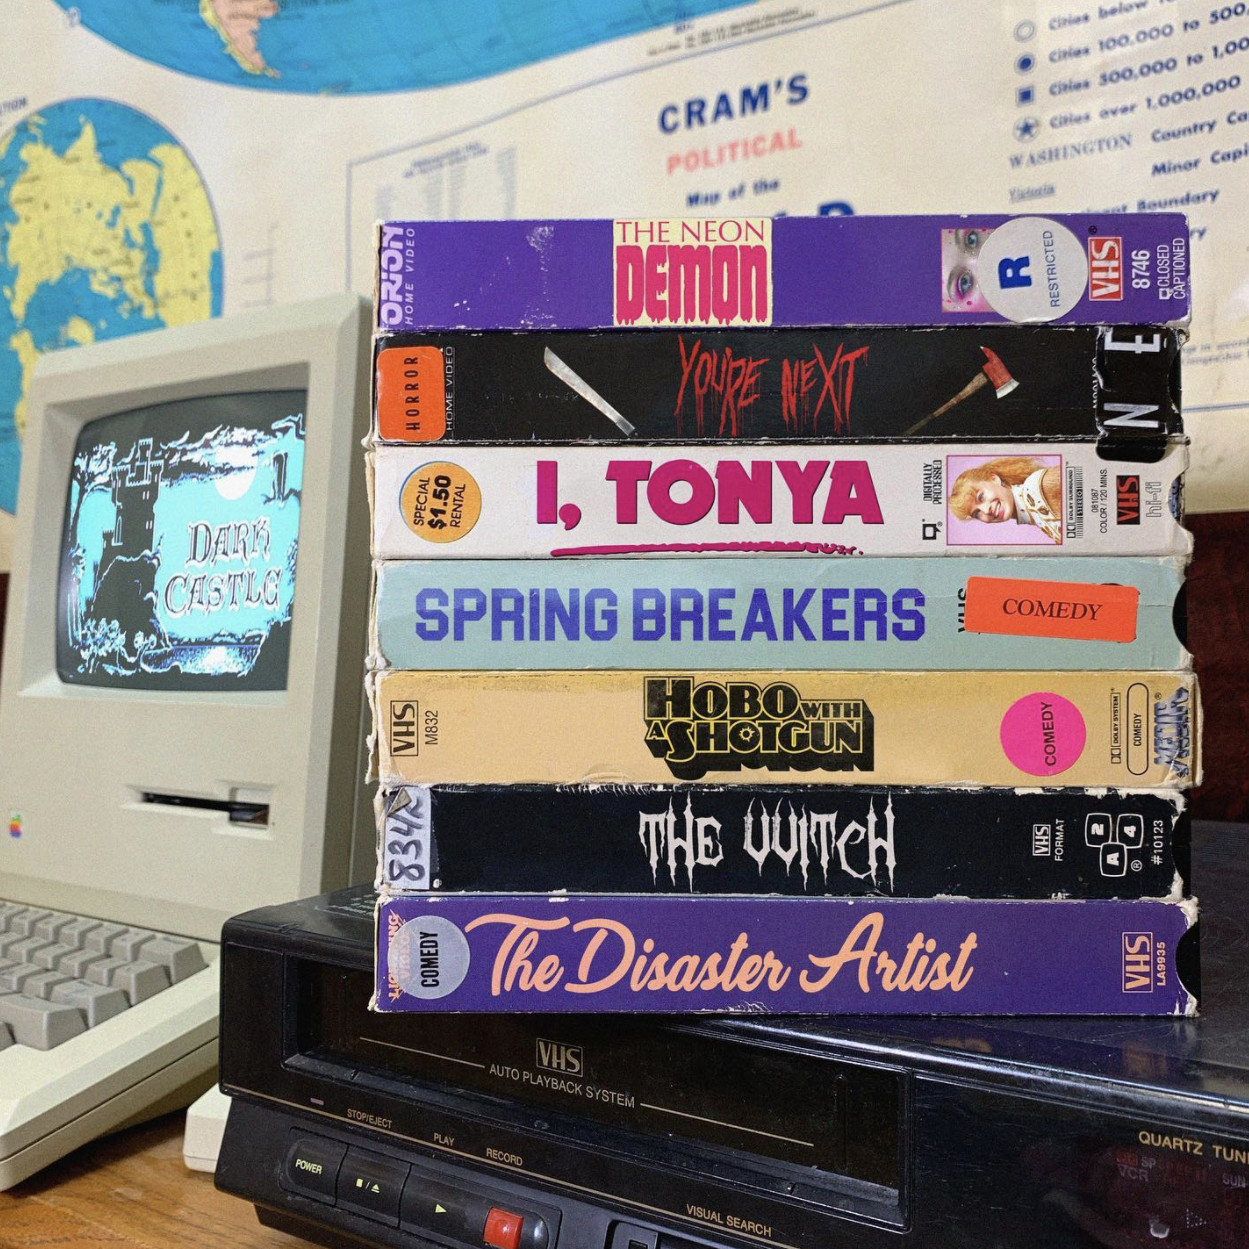 VHS tape edits - display device - Cd 300 Doorlog to Doo Cram'S Political Inc The Neon Oro Vhs 9128 Go Horror In 1.50 Sun Dar Casino Comedy Demon Youpe Next 1 I, Tonya Via Spring Breakers Shotgin The Quitch The Disaster Artist Til 834 Vas Vhs Nws Awoe 815 